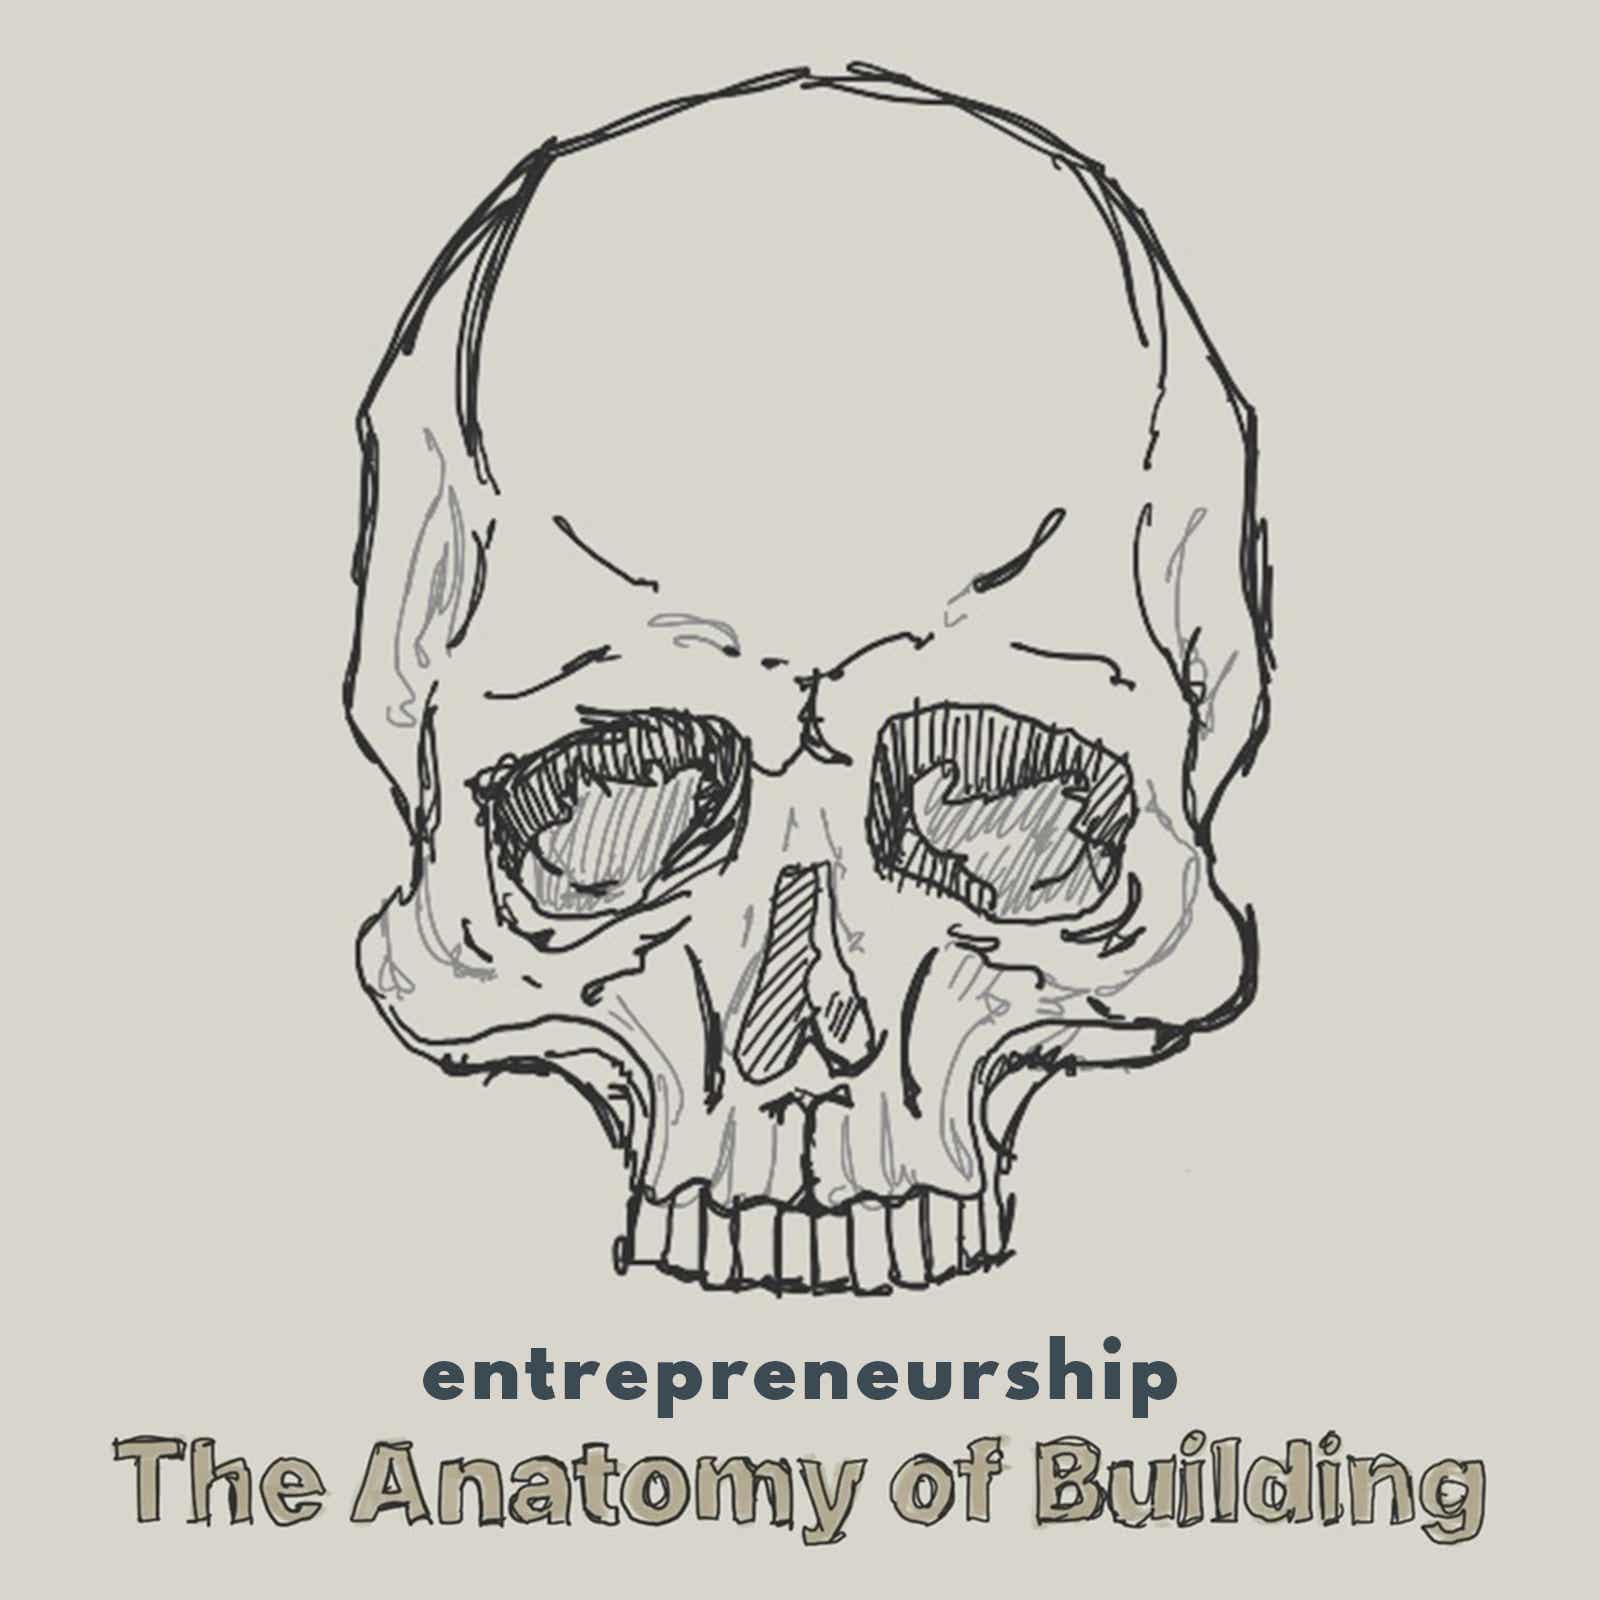 The Anatomy of Building by Josh Rosenthal